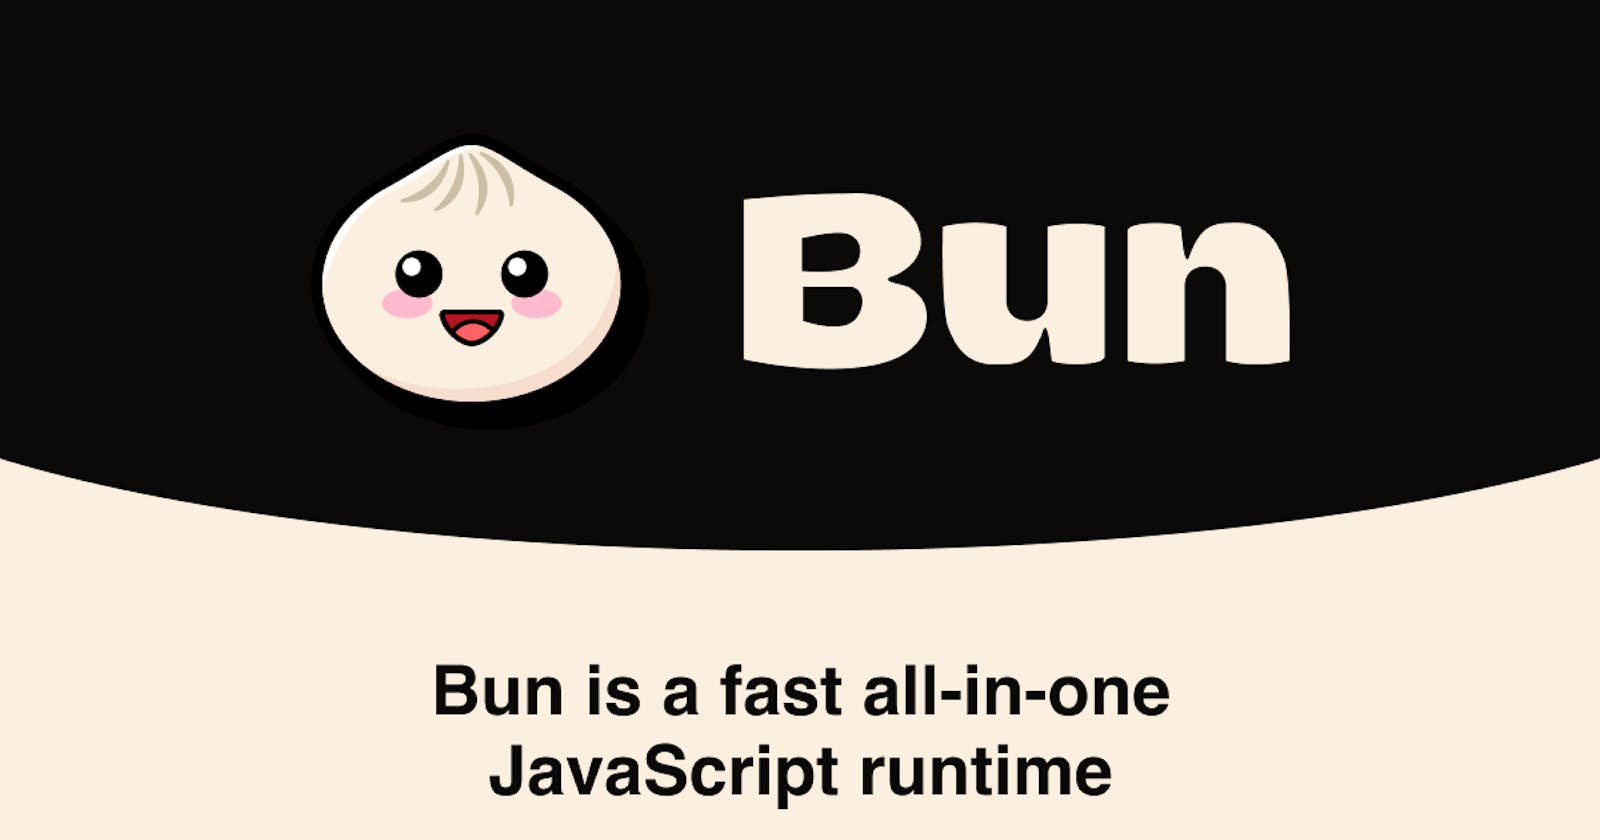 What’s the deal with Bun?